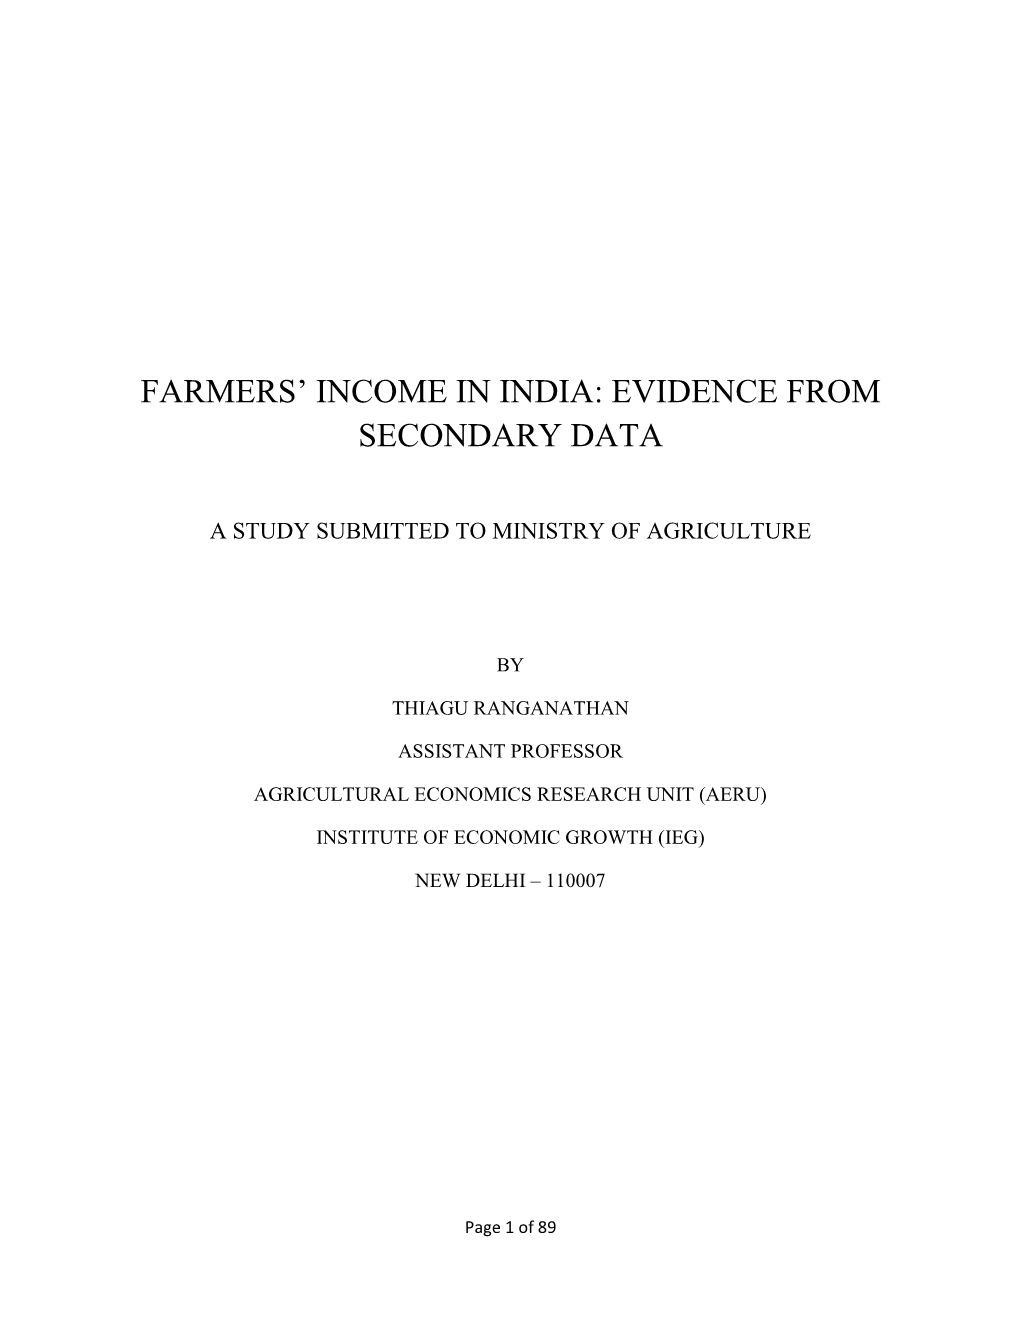 Farmers' Income in India: Evidence from Secondary